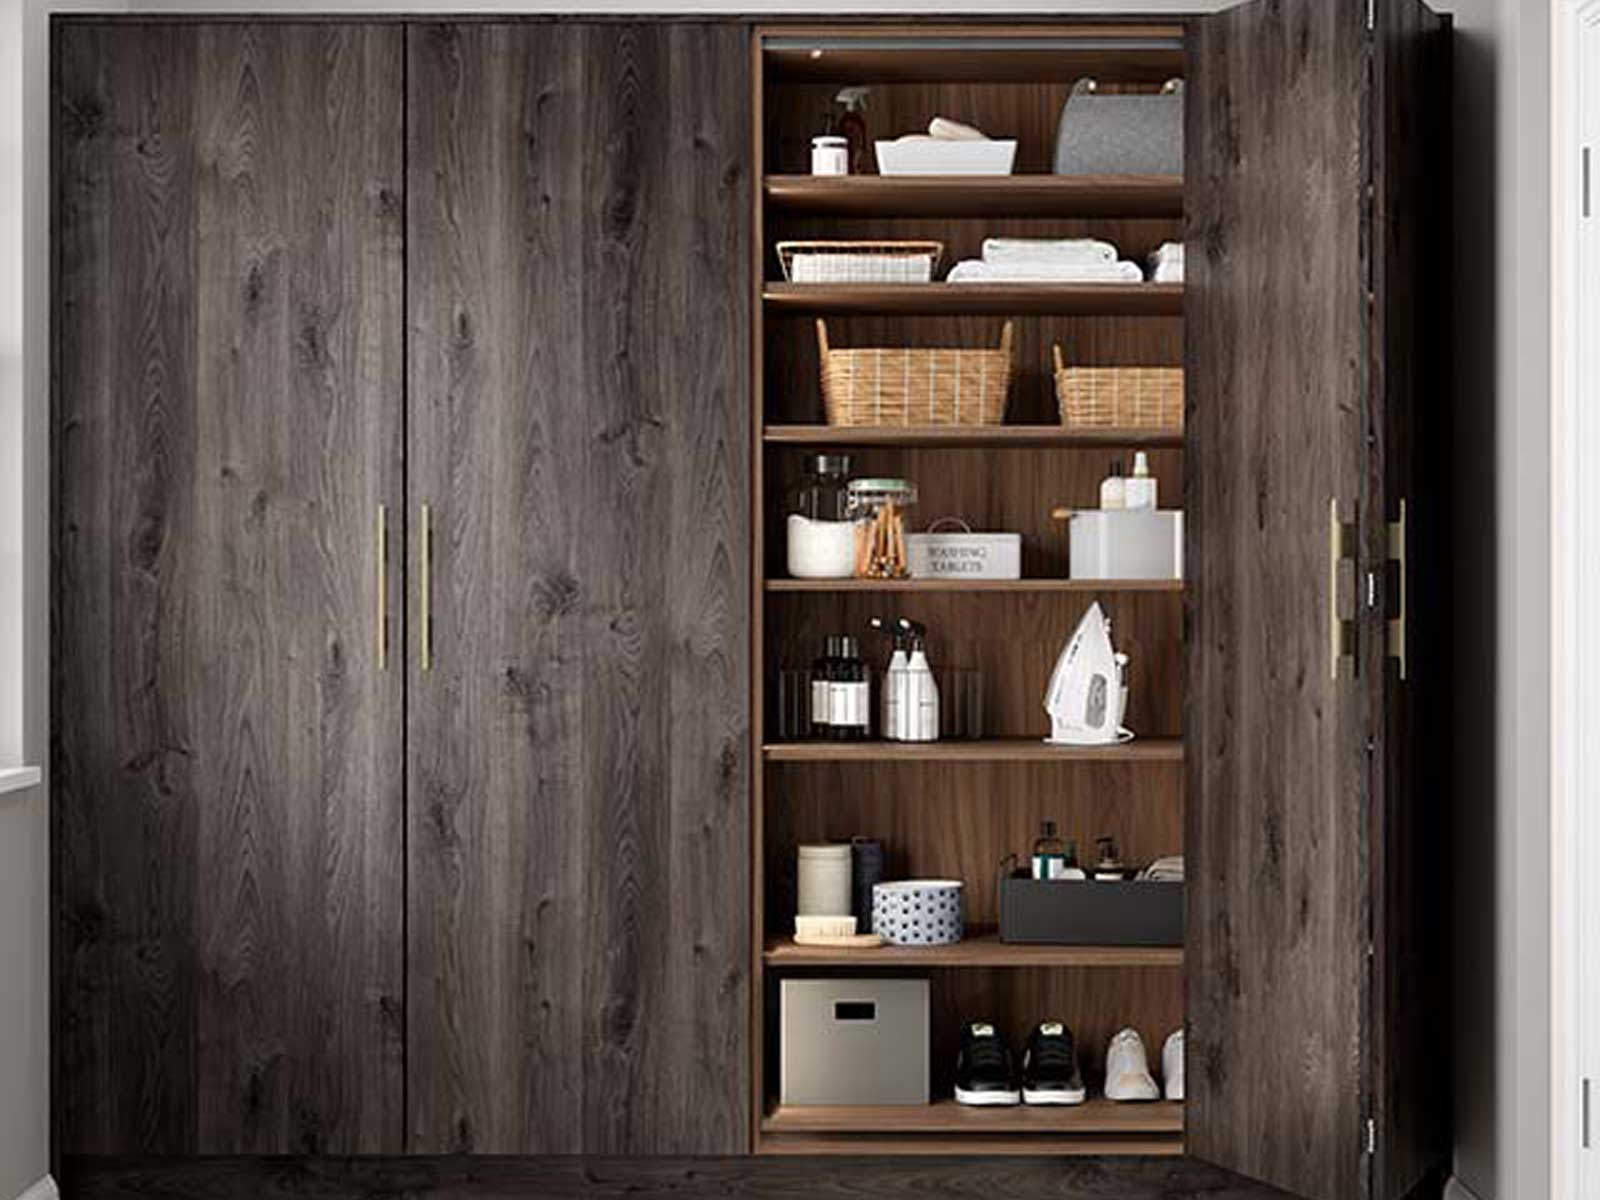 Space-efficient storage in the form of a tall larder unit with wingline doors